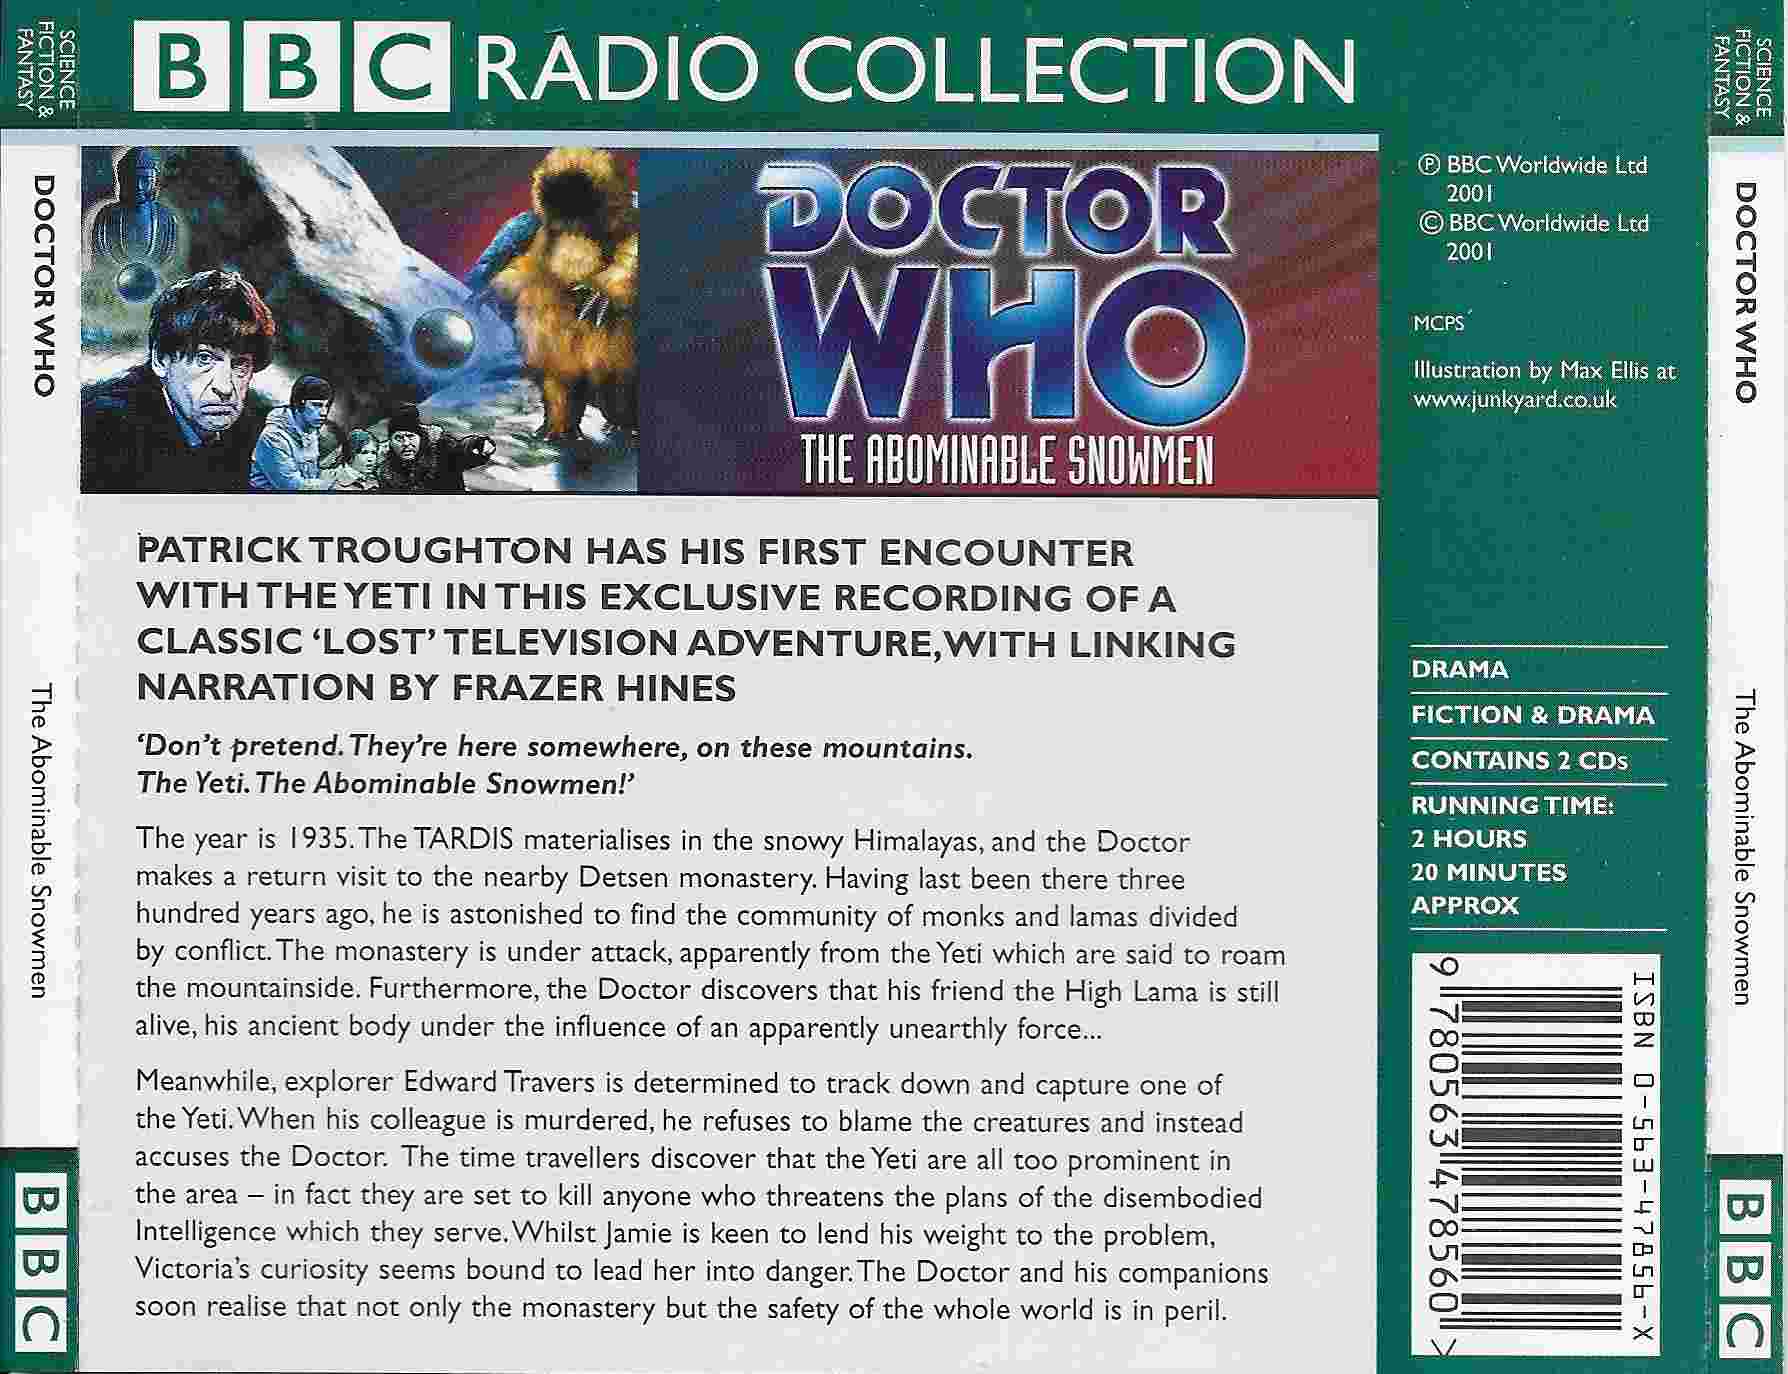 Picture of ISBN 0-563-47856-X Doctor Who - The abominable snowmen by artist Mervyn Haisman / Henry Lincoln from the BBC records and Tapes library